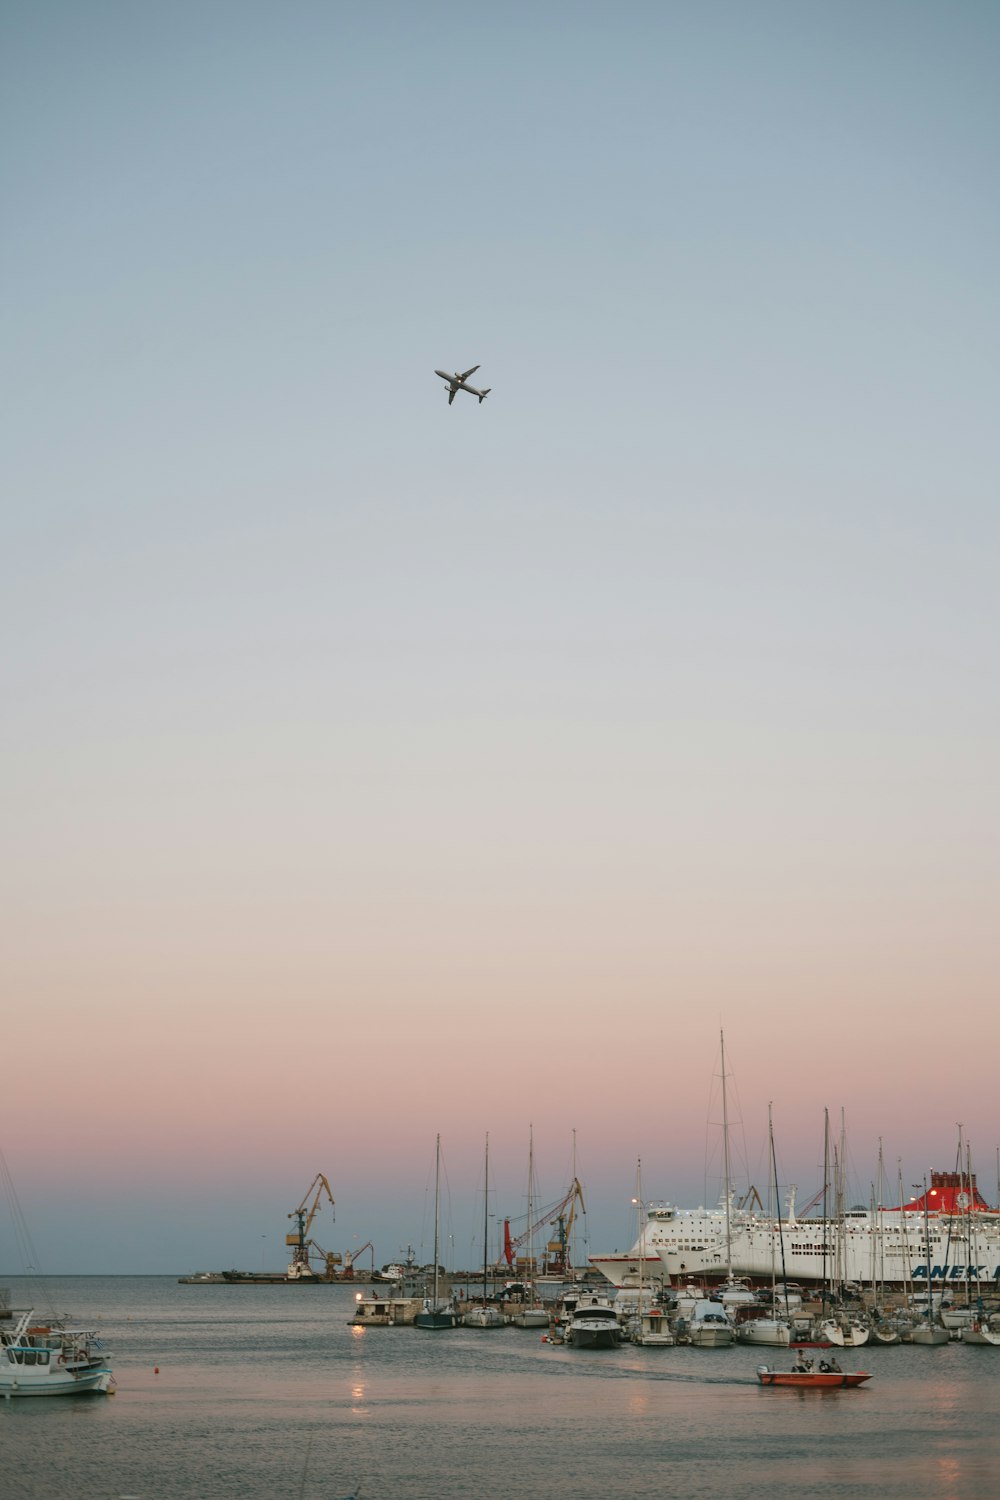 a plane flying over a harbor